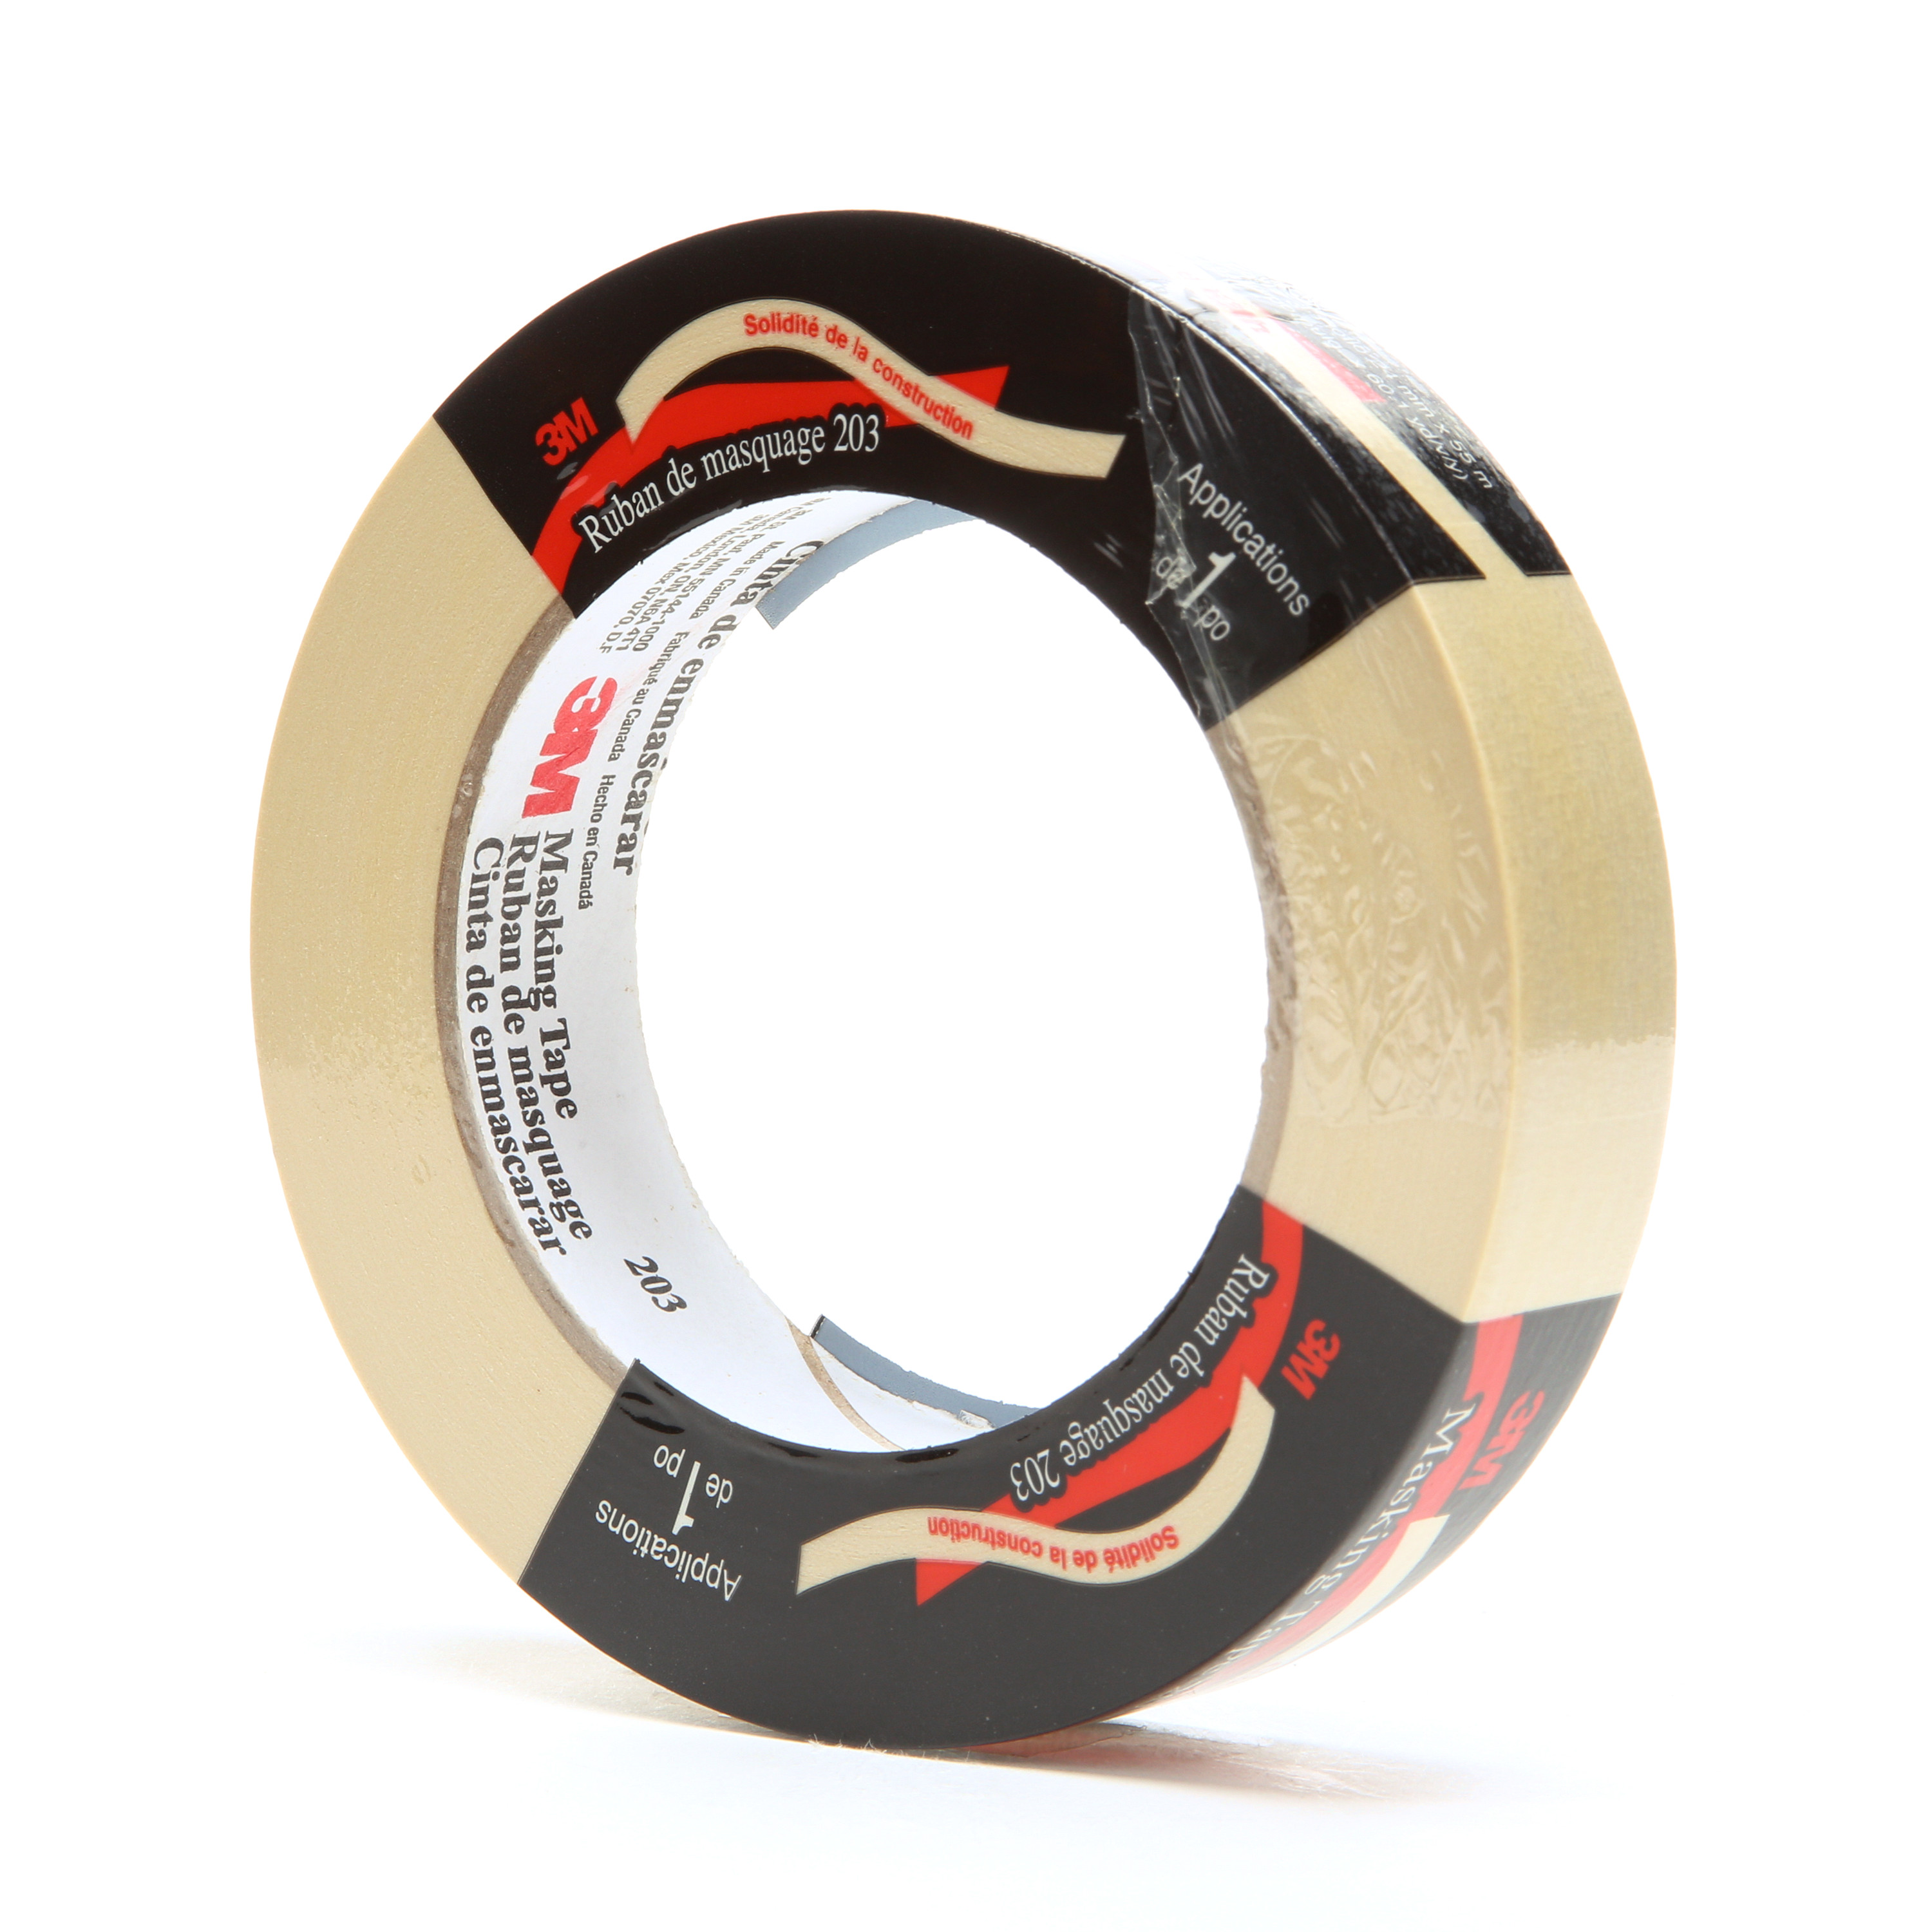 3M™ General Purpose Masking Tape 203, Beige, 24 mm x 55 m, 4.7 mil, 36
per case, Individually Wrapped Conveniently Packaged